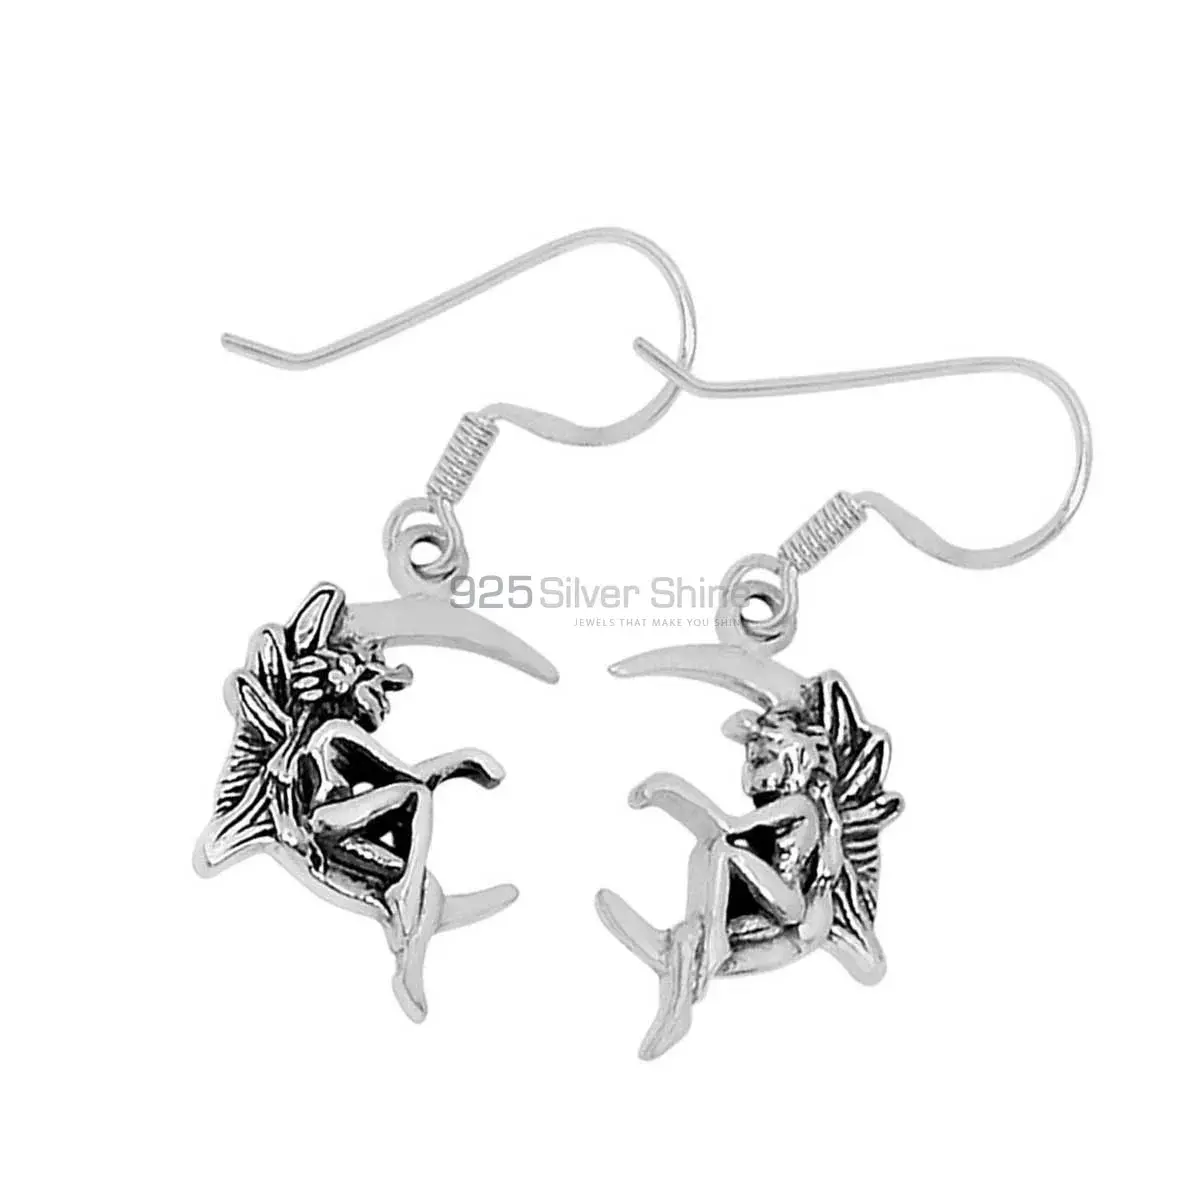 Affordable 925 Sterling Silver Oxidized Earrings Exporters 925SE2883_2